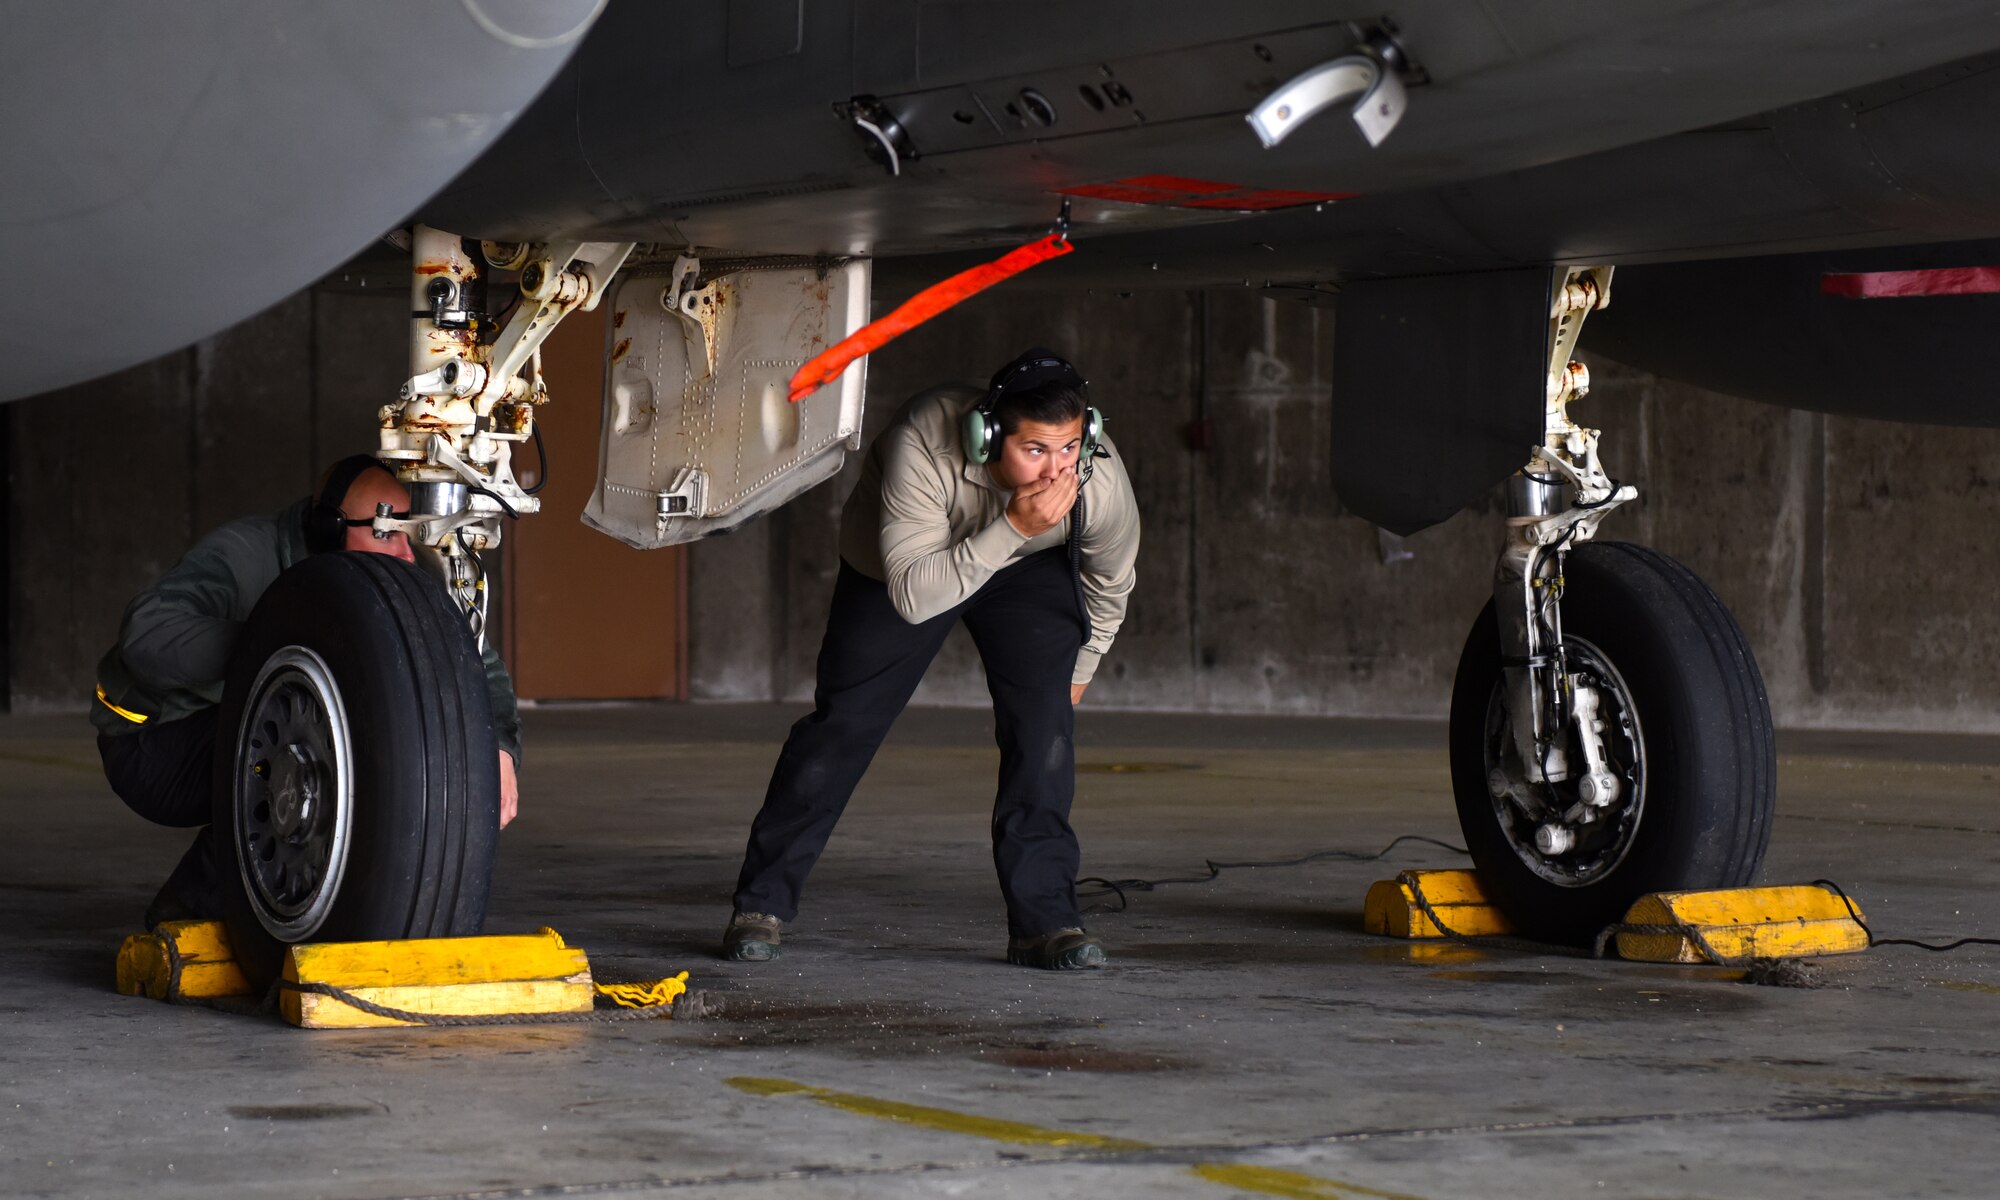 An Airman assigned to the 748th Aircraft Maintenance Squadron readies an F-15C Eagle for departure at Keflavik Air Base, Iceland, Aug. 1, 2018, in support of NATO’s Icelandic Air Surveillance mission. During IAS, the 748th AMXS Airmen are responsible for maintaining the four mission critical F-15s as well as 10 additional jets designated for training. (U.S. Air Force photo/Staff Sgt. Alex Fox Echols III)